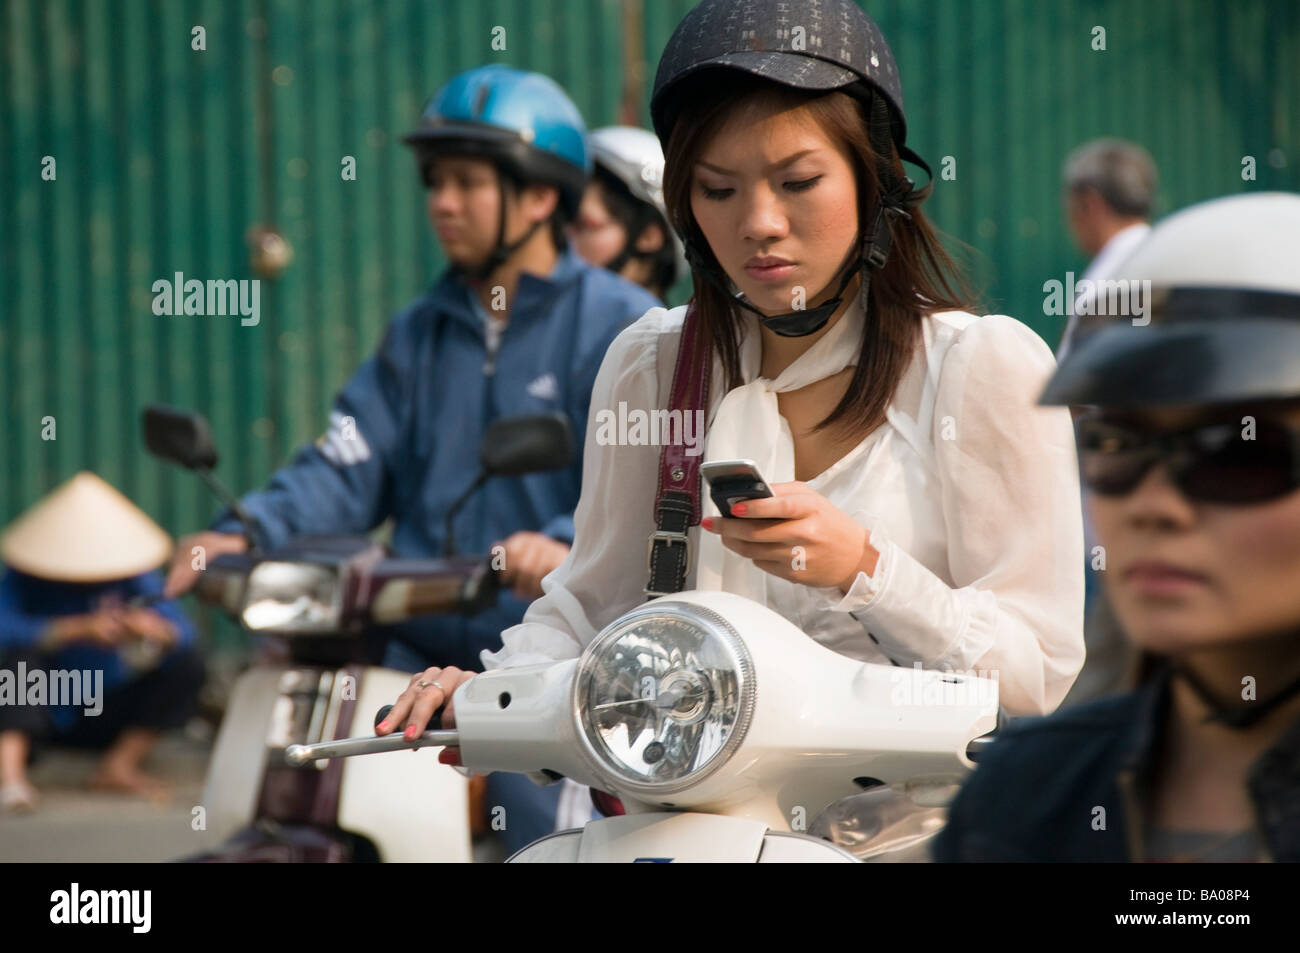 woman talking on her phone while riding a motorbike in Hanoi Vietnam Stock Photo